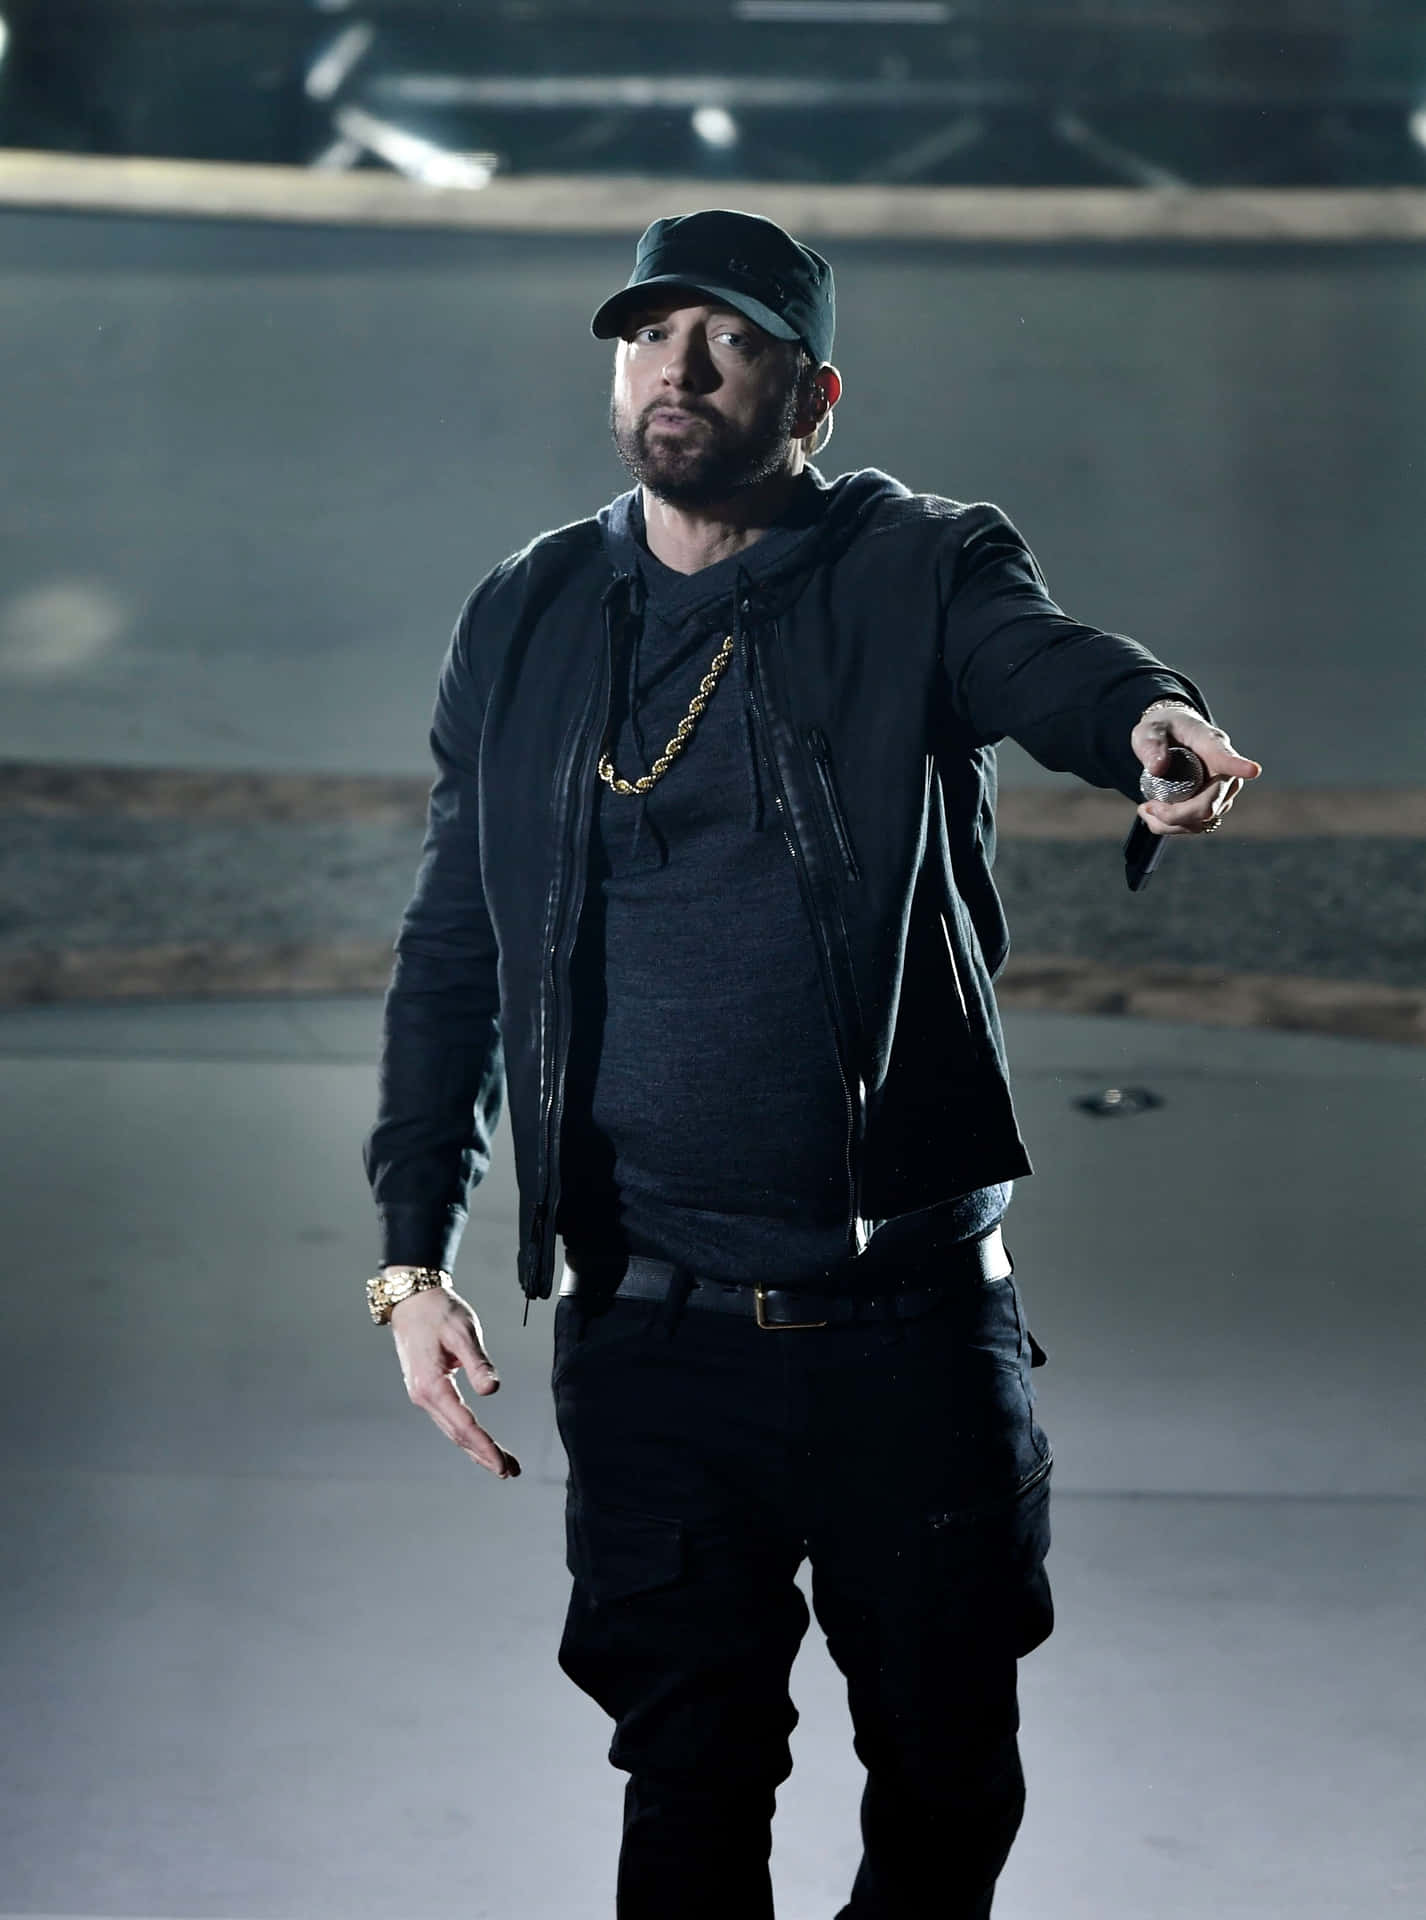 Eminem fiercely looks into the camera as he performs on stage.